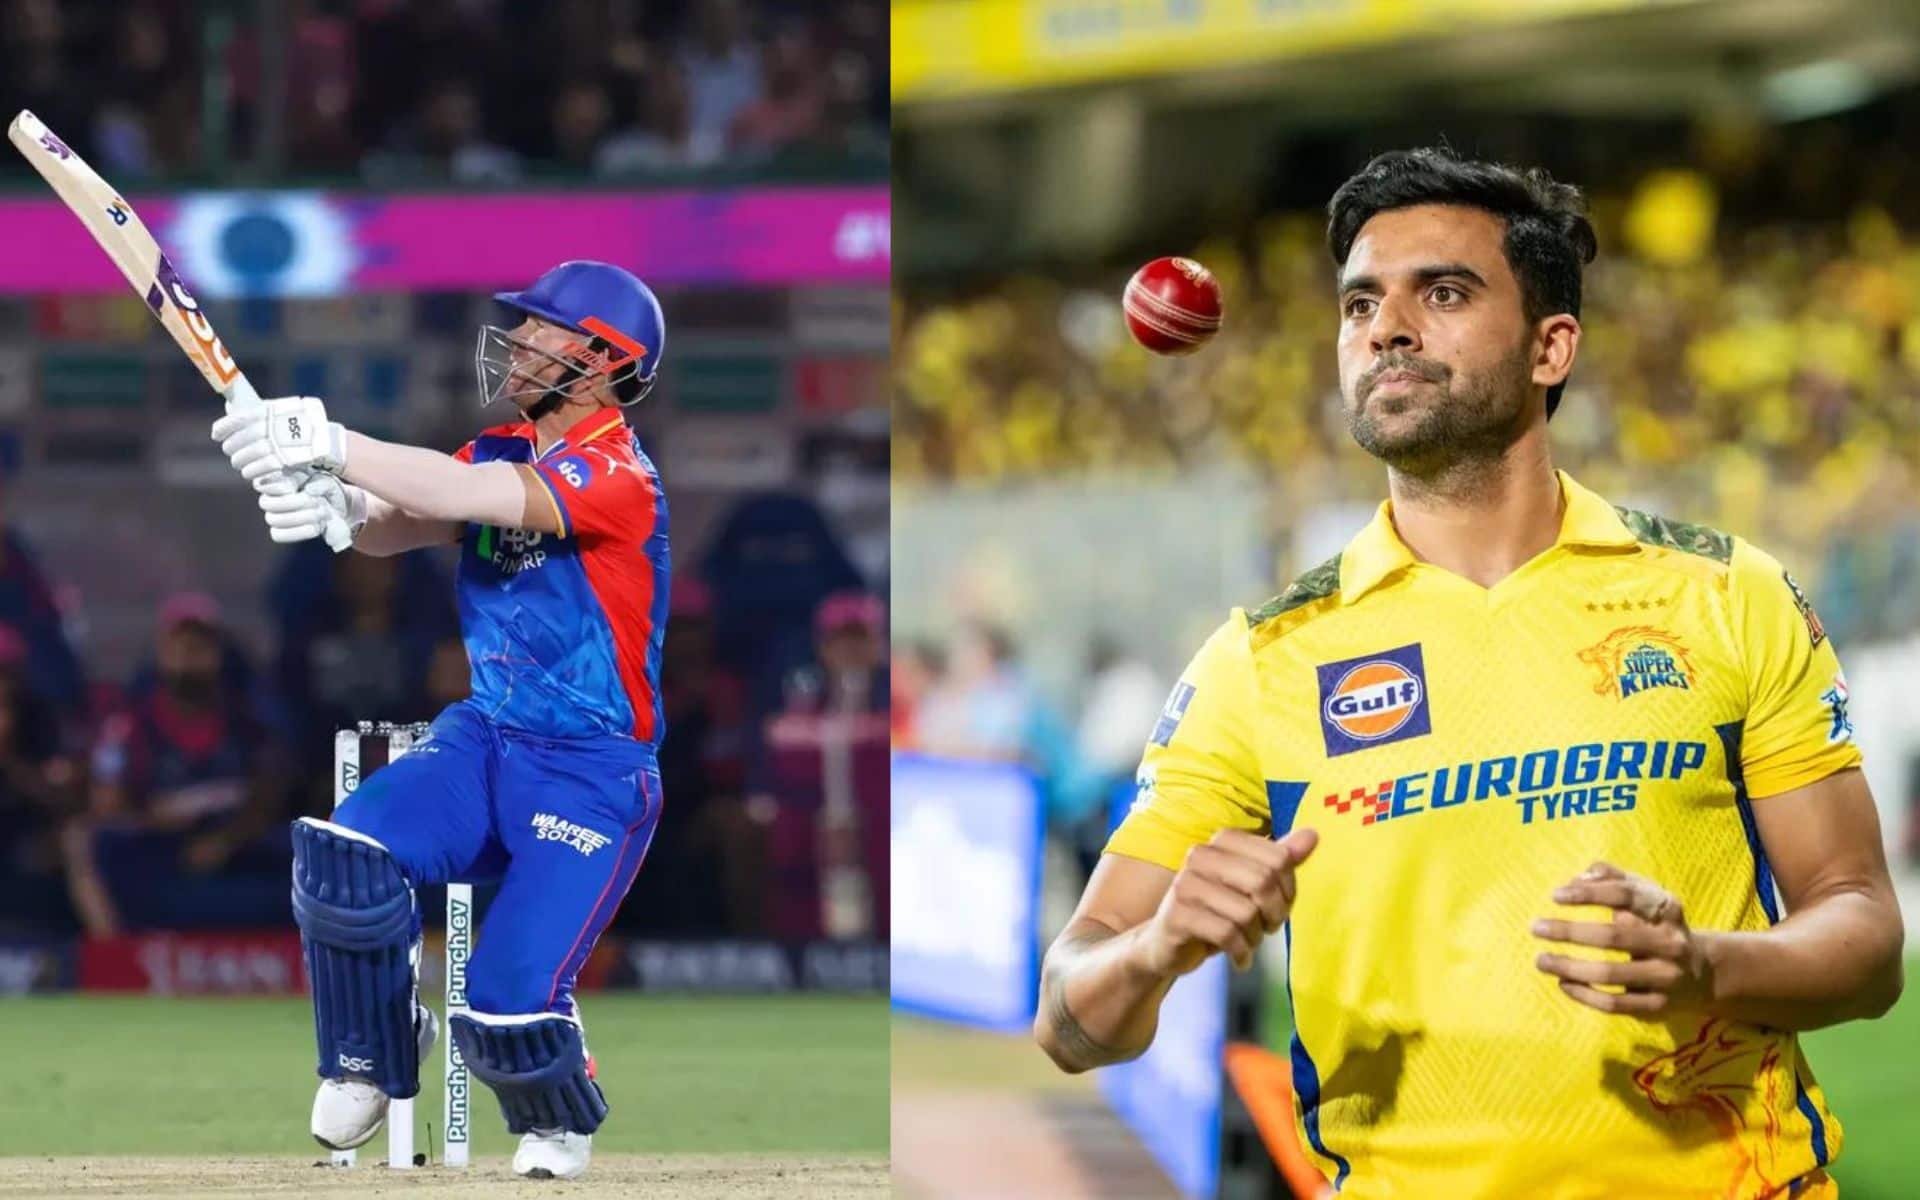 David Warner vs Deepak Chahar will be a great face-off in the game [iplt20.com]